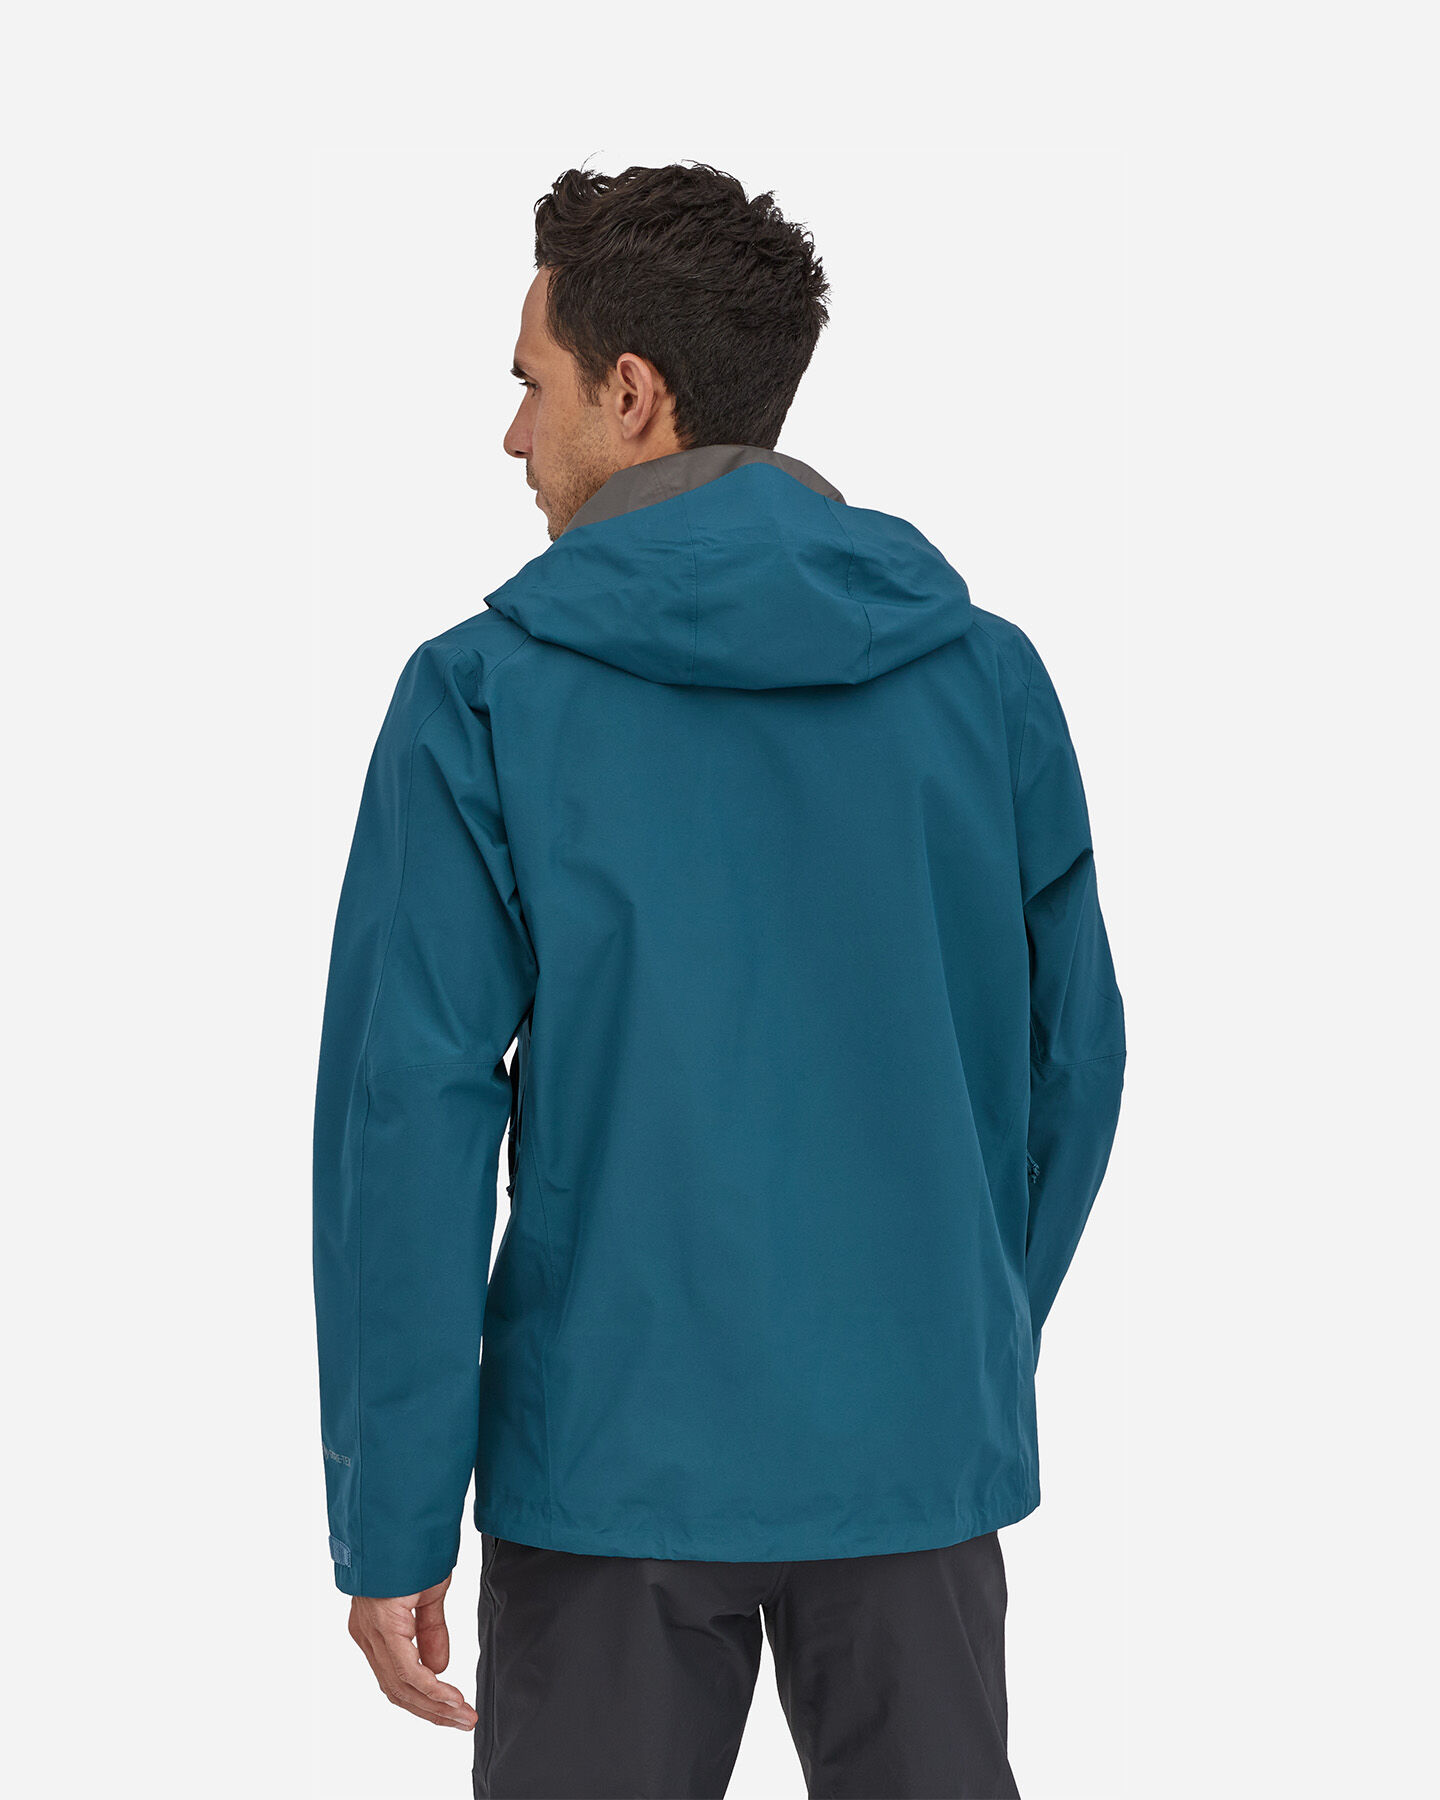  Giacca outdoor PATAGONIA CALCITE M S4097078|CRBA|XL scatto 1